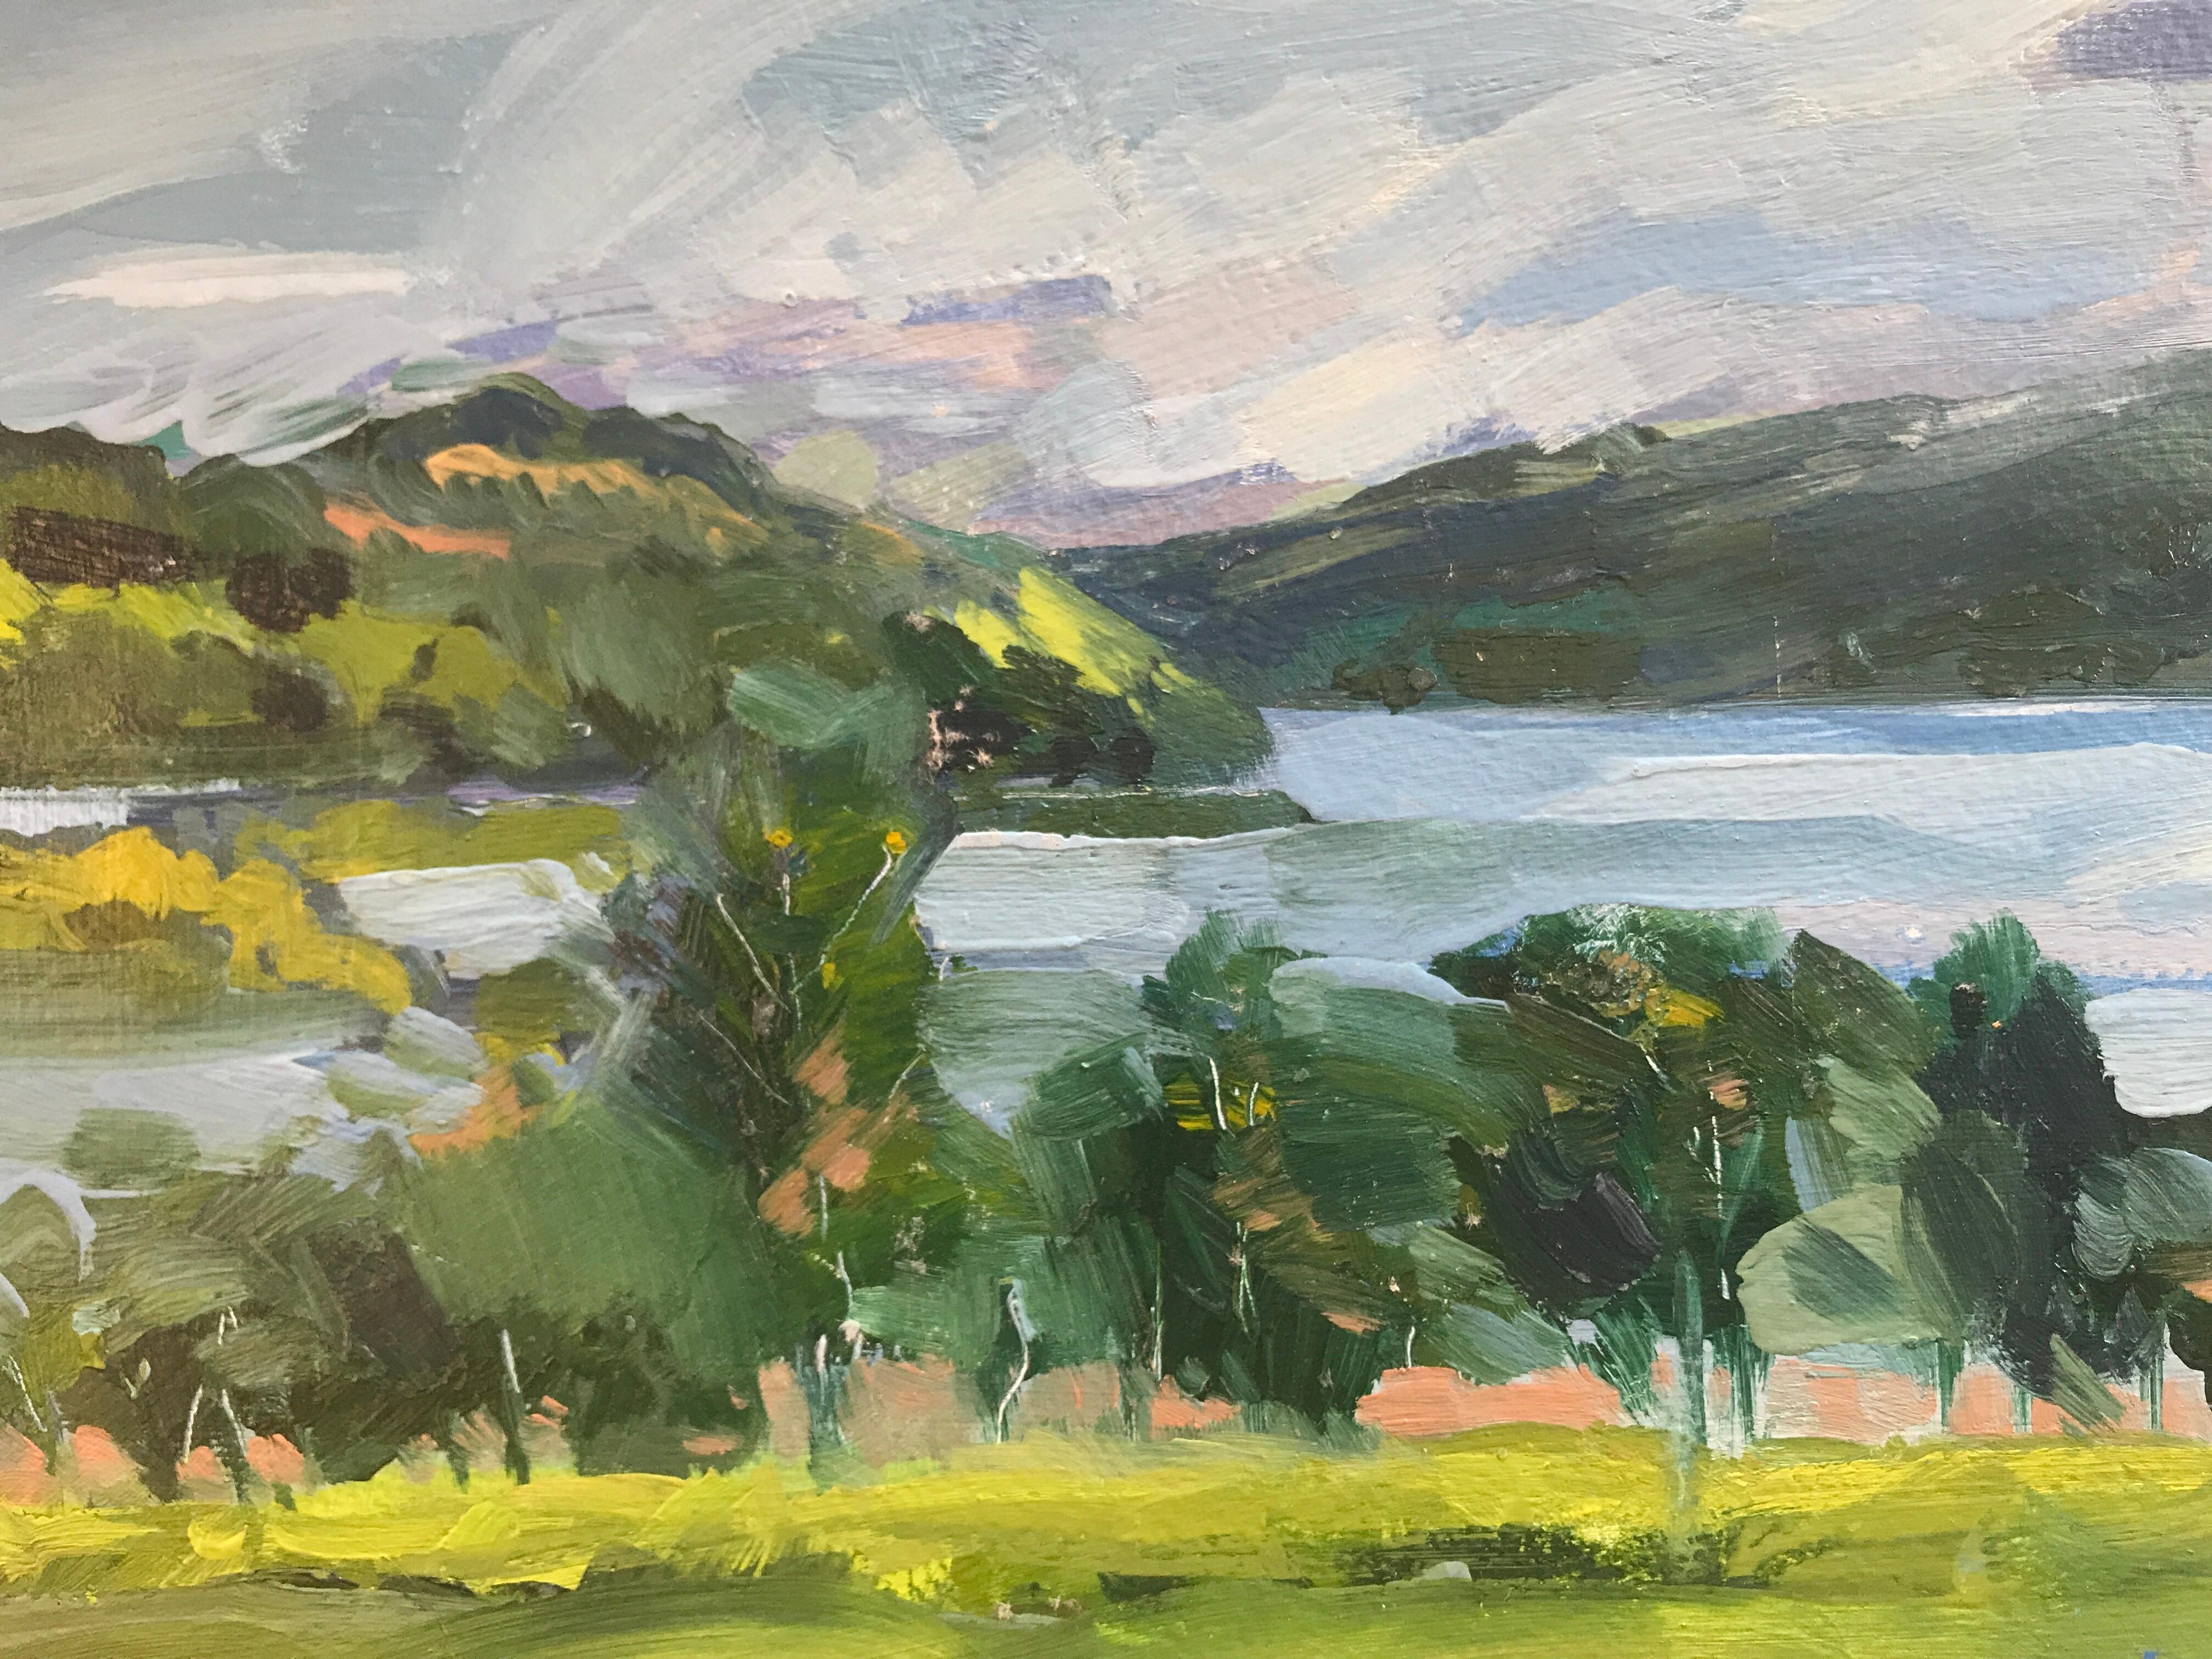 Still Day By The Loch, Scotland, Original painting, Landscape, Nature, Green art For Sale 10